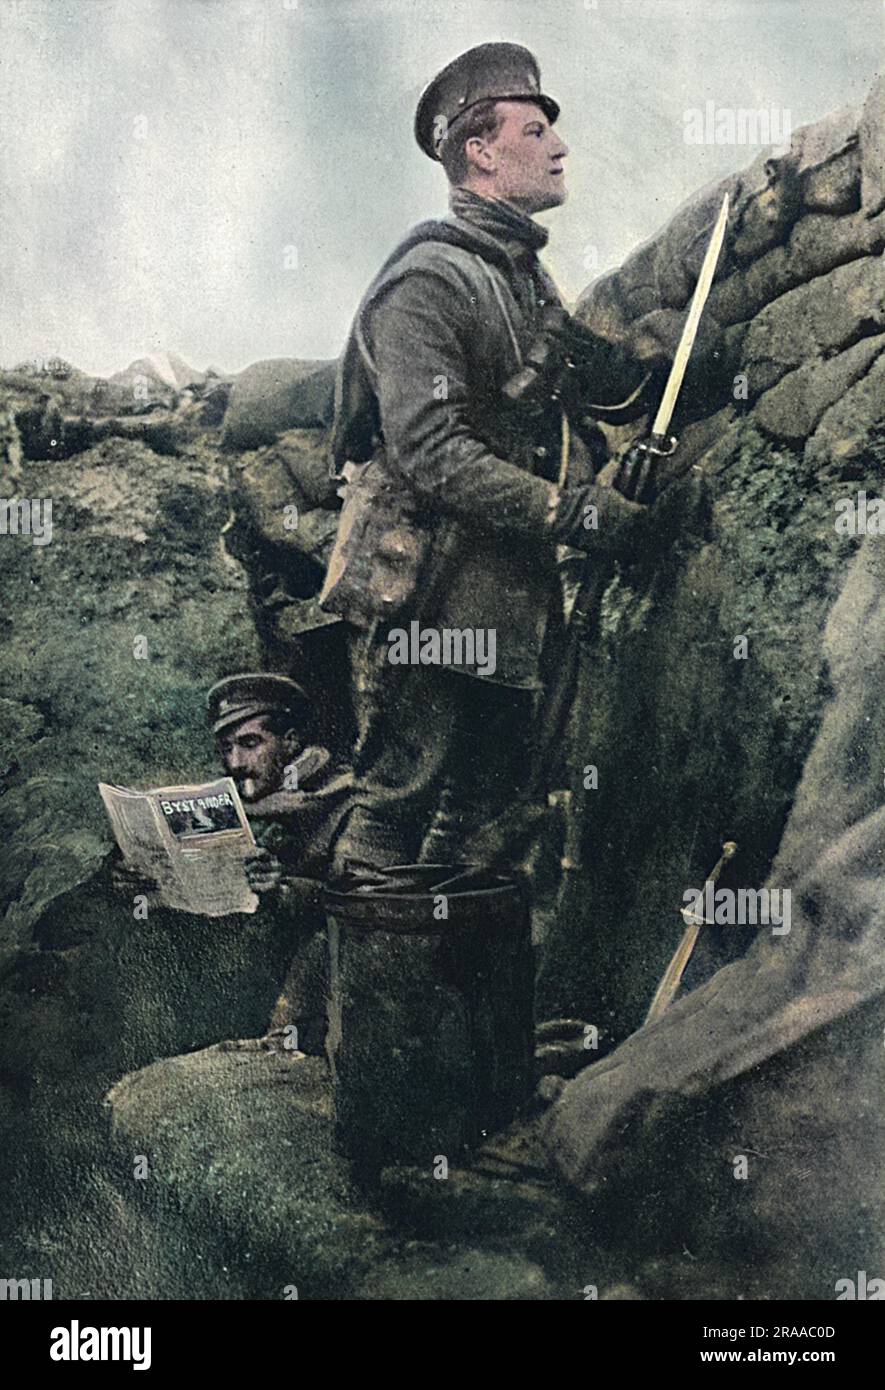 A sentry keeps watch in a British trench while his comrade spends his turn off duty reading a copy of the Bystander, 'the latest issue of this journal, with its reminders of the humours of life in the trenches  and joys of life in England now.'  The Bystander, which ran from 1903 to 1940 (when it merged with The Tatler), was a high quality weekly illustrated magazine, first published by The Graphic and later part of the Illustrated Newspapers group.  It cover sport, society, fashion, politics, entertainment and the arts, and published many cartoons and humorous illustrations covering topics of Stock Photo